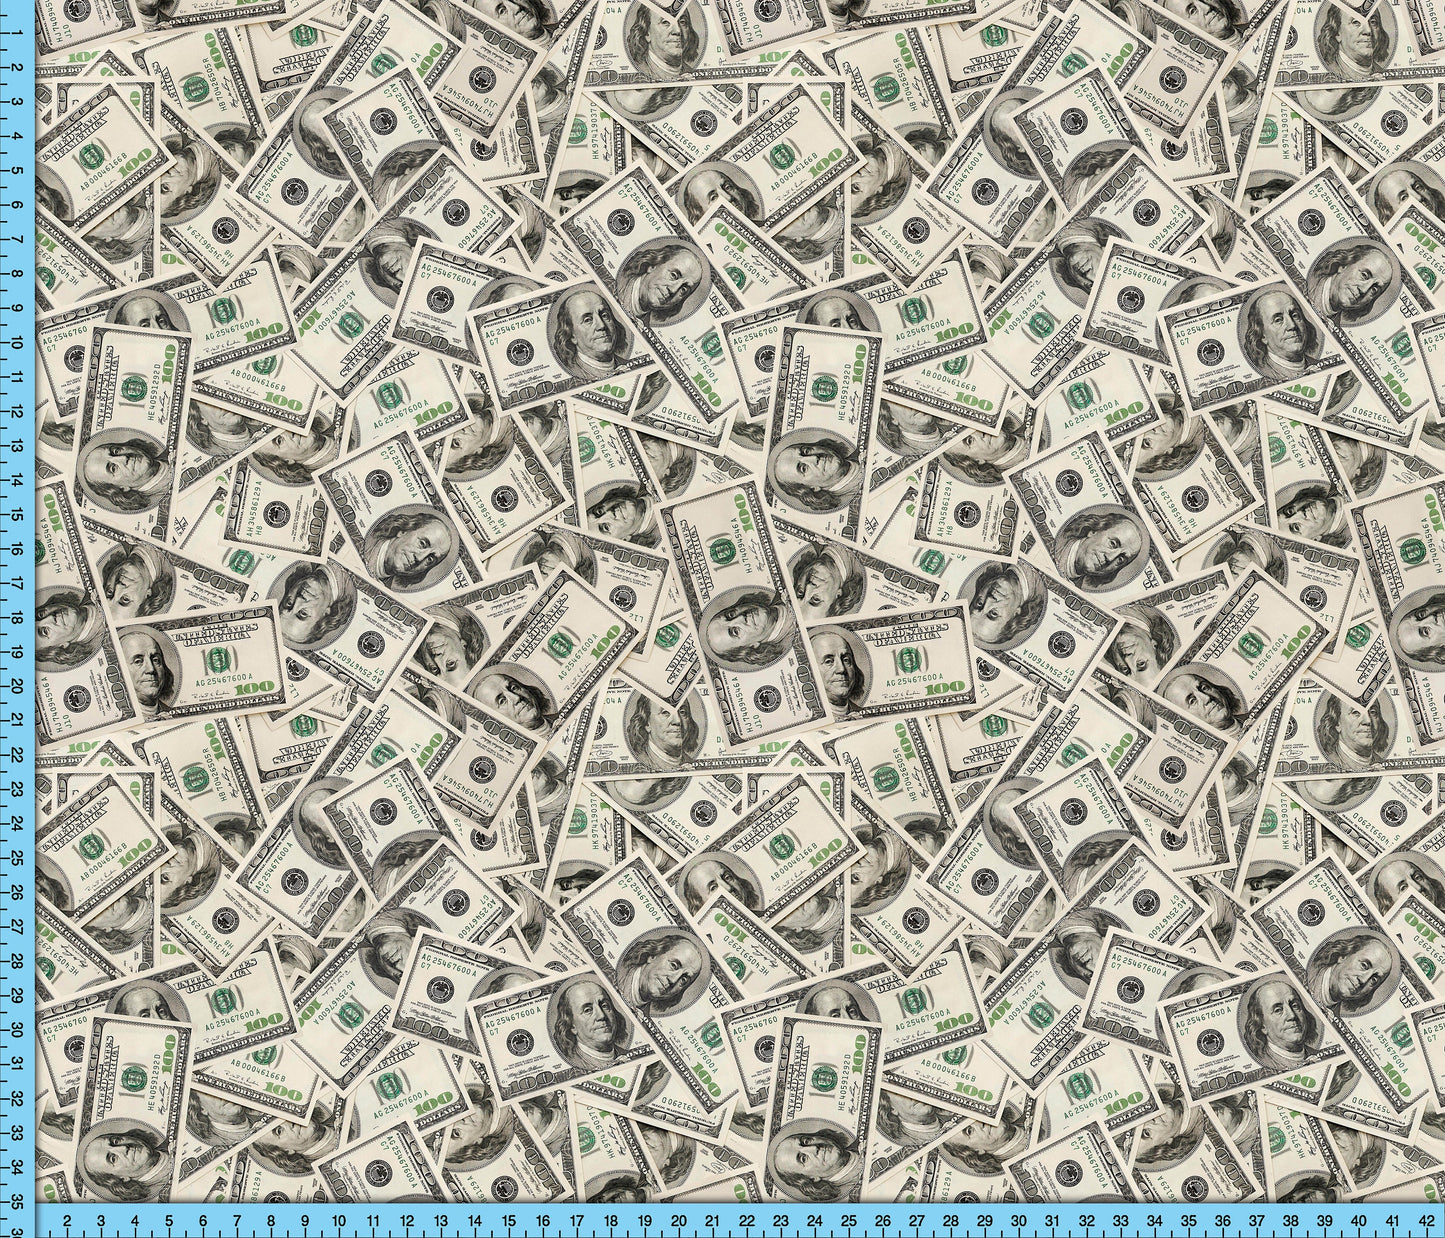 Hundred Dollar Fabric By the Yard, Money Pattern Photo Design for Crafts, Upholstery, Clothing